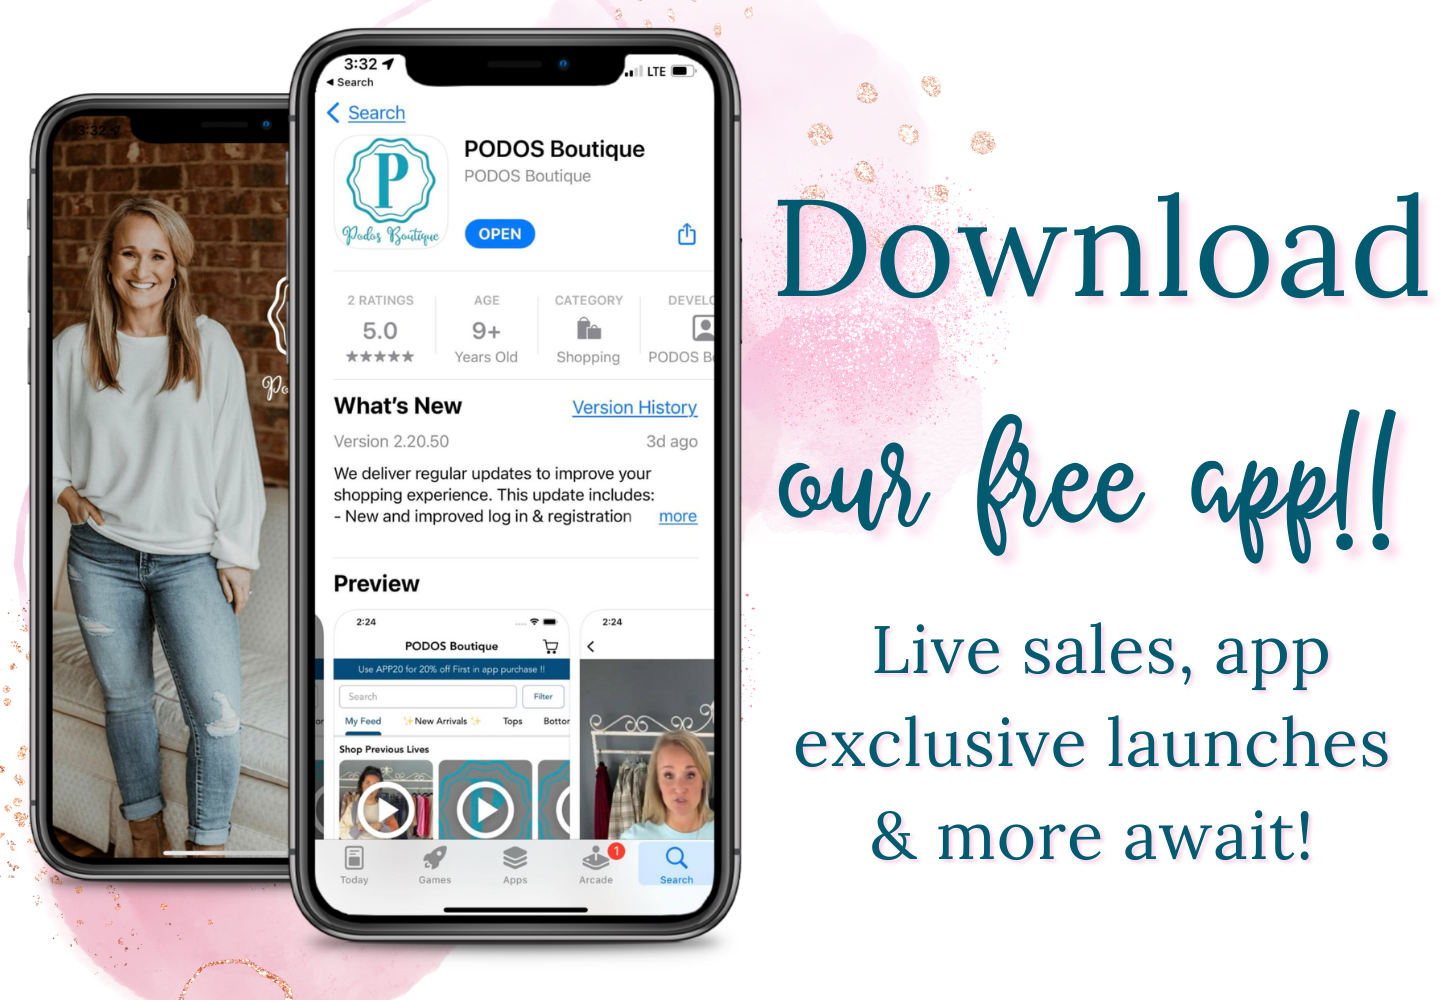 Download our free app!! Live sales, app exclusive launches & more await!